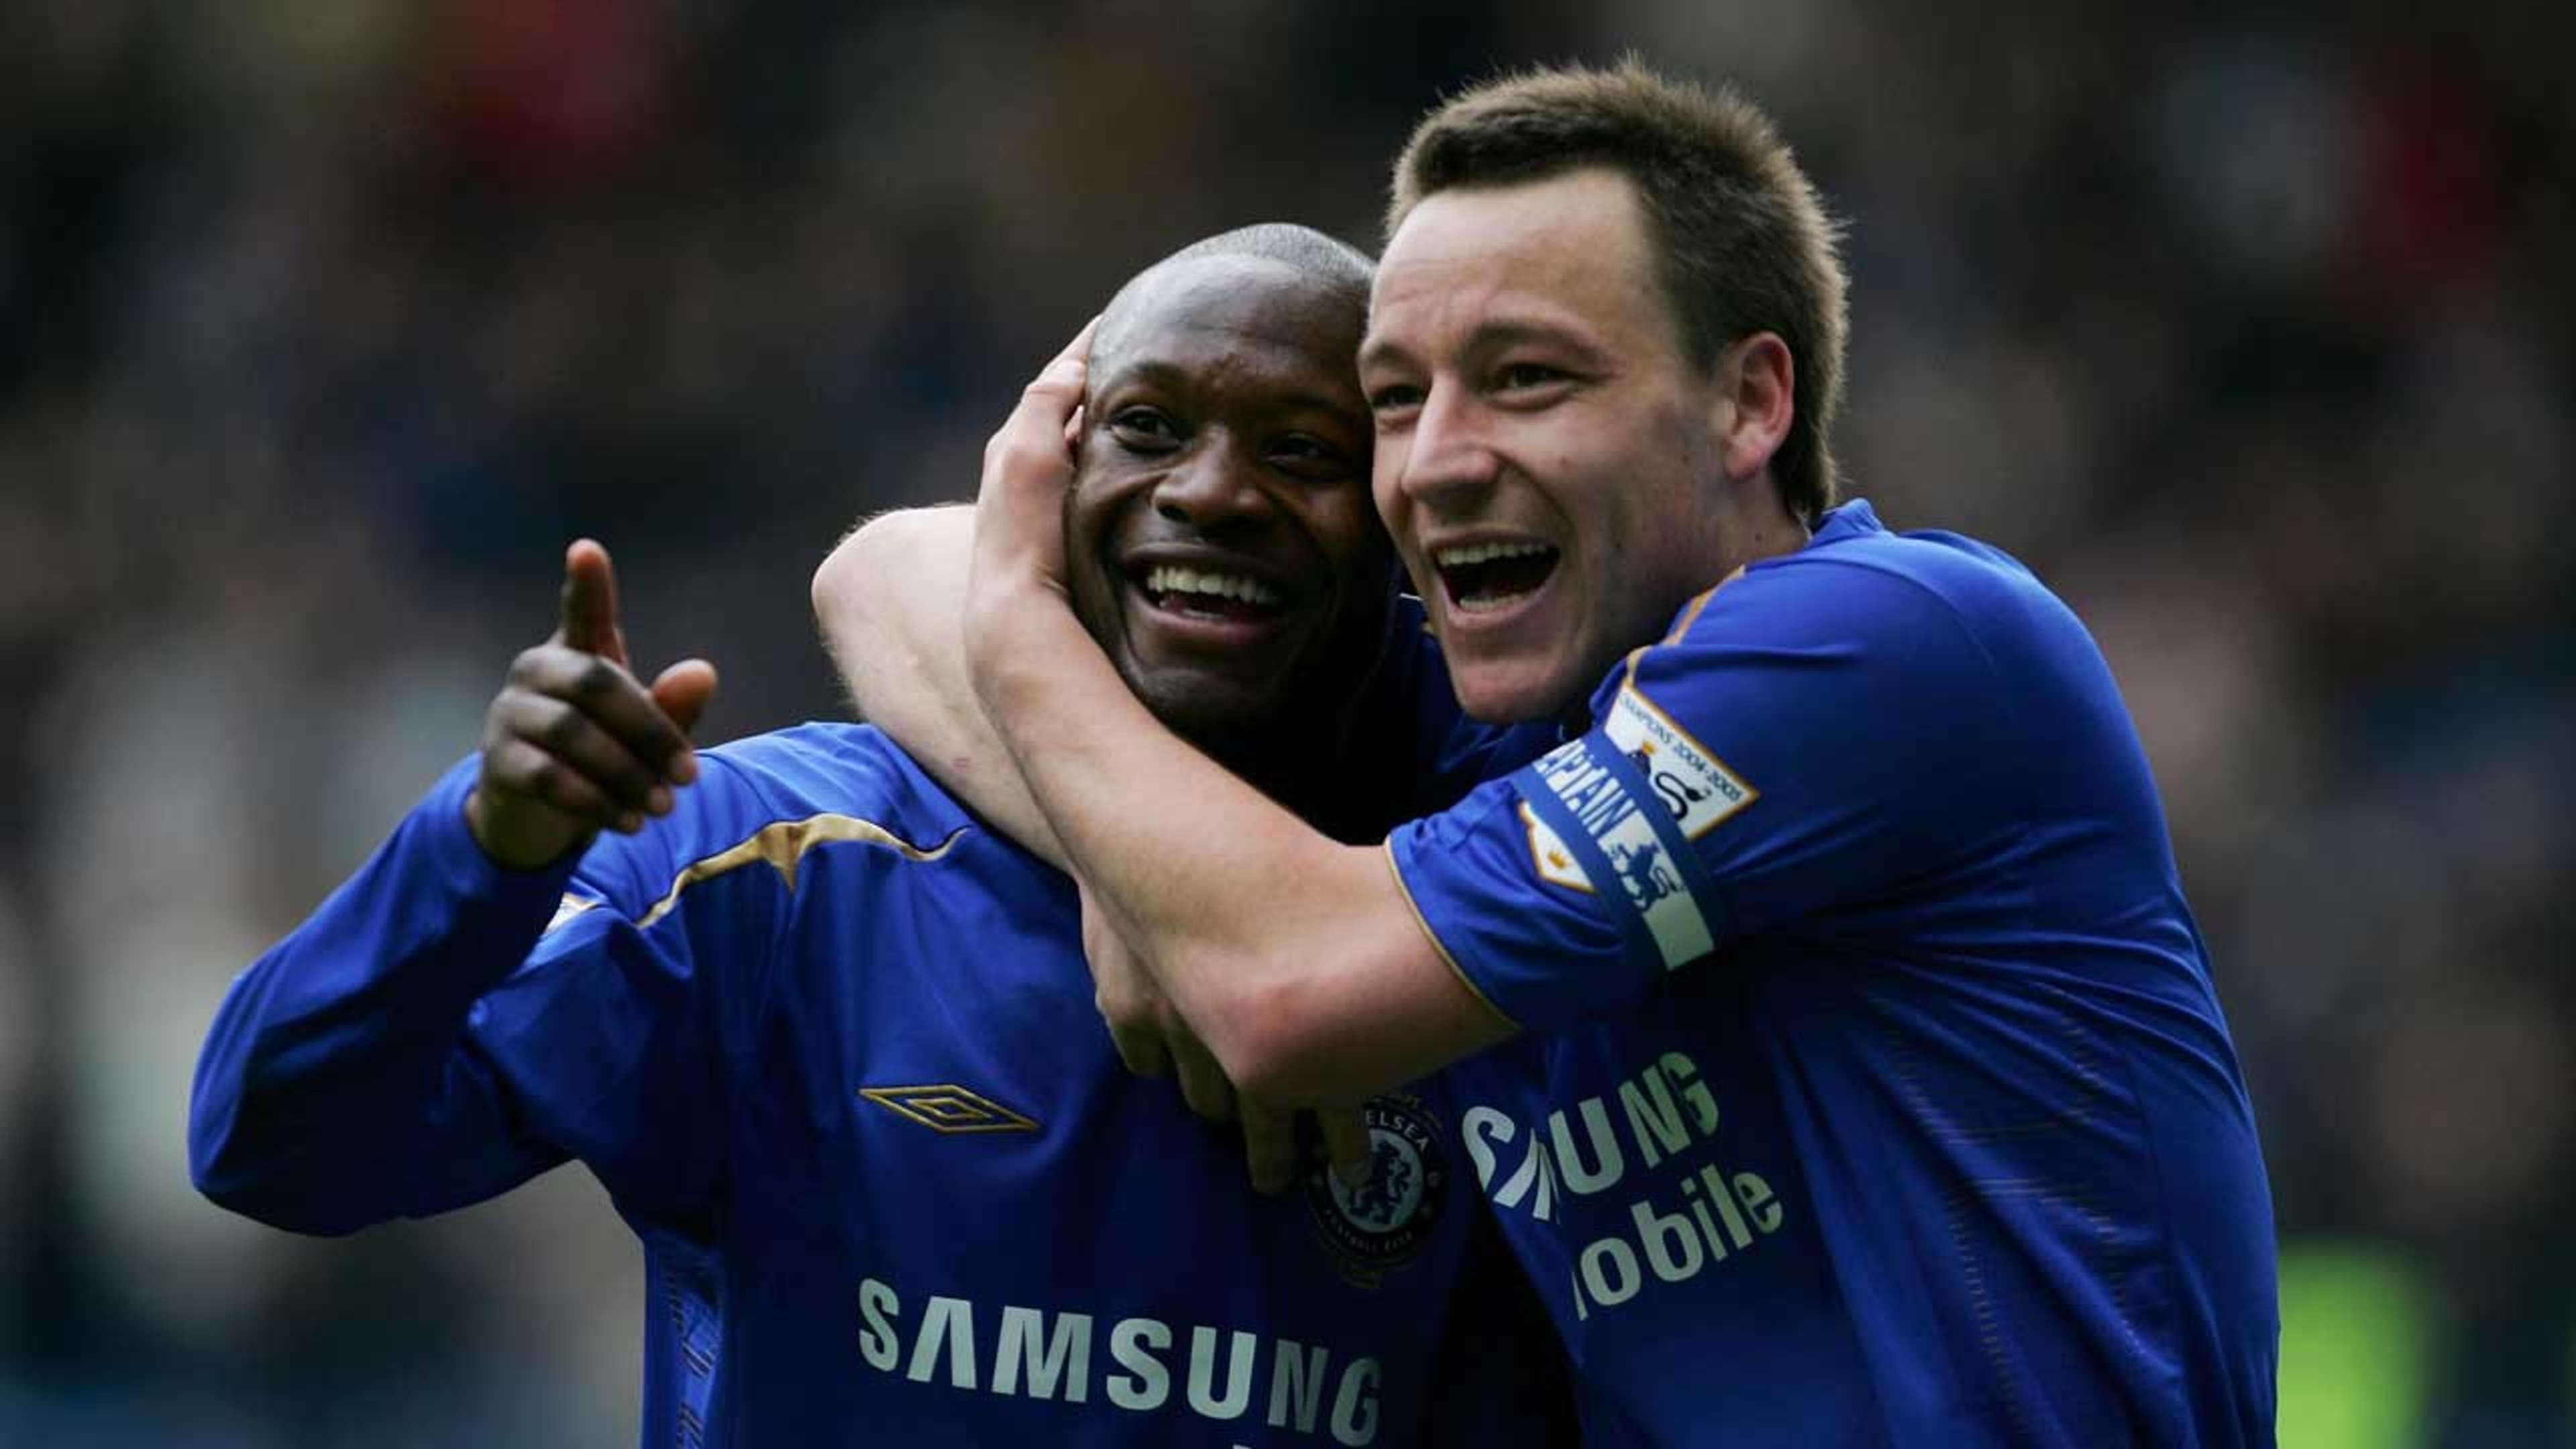 William Gallas and John Terry